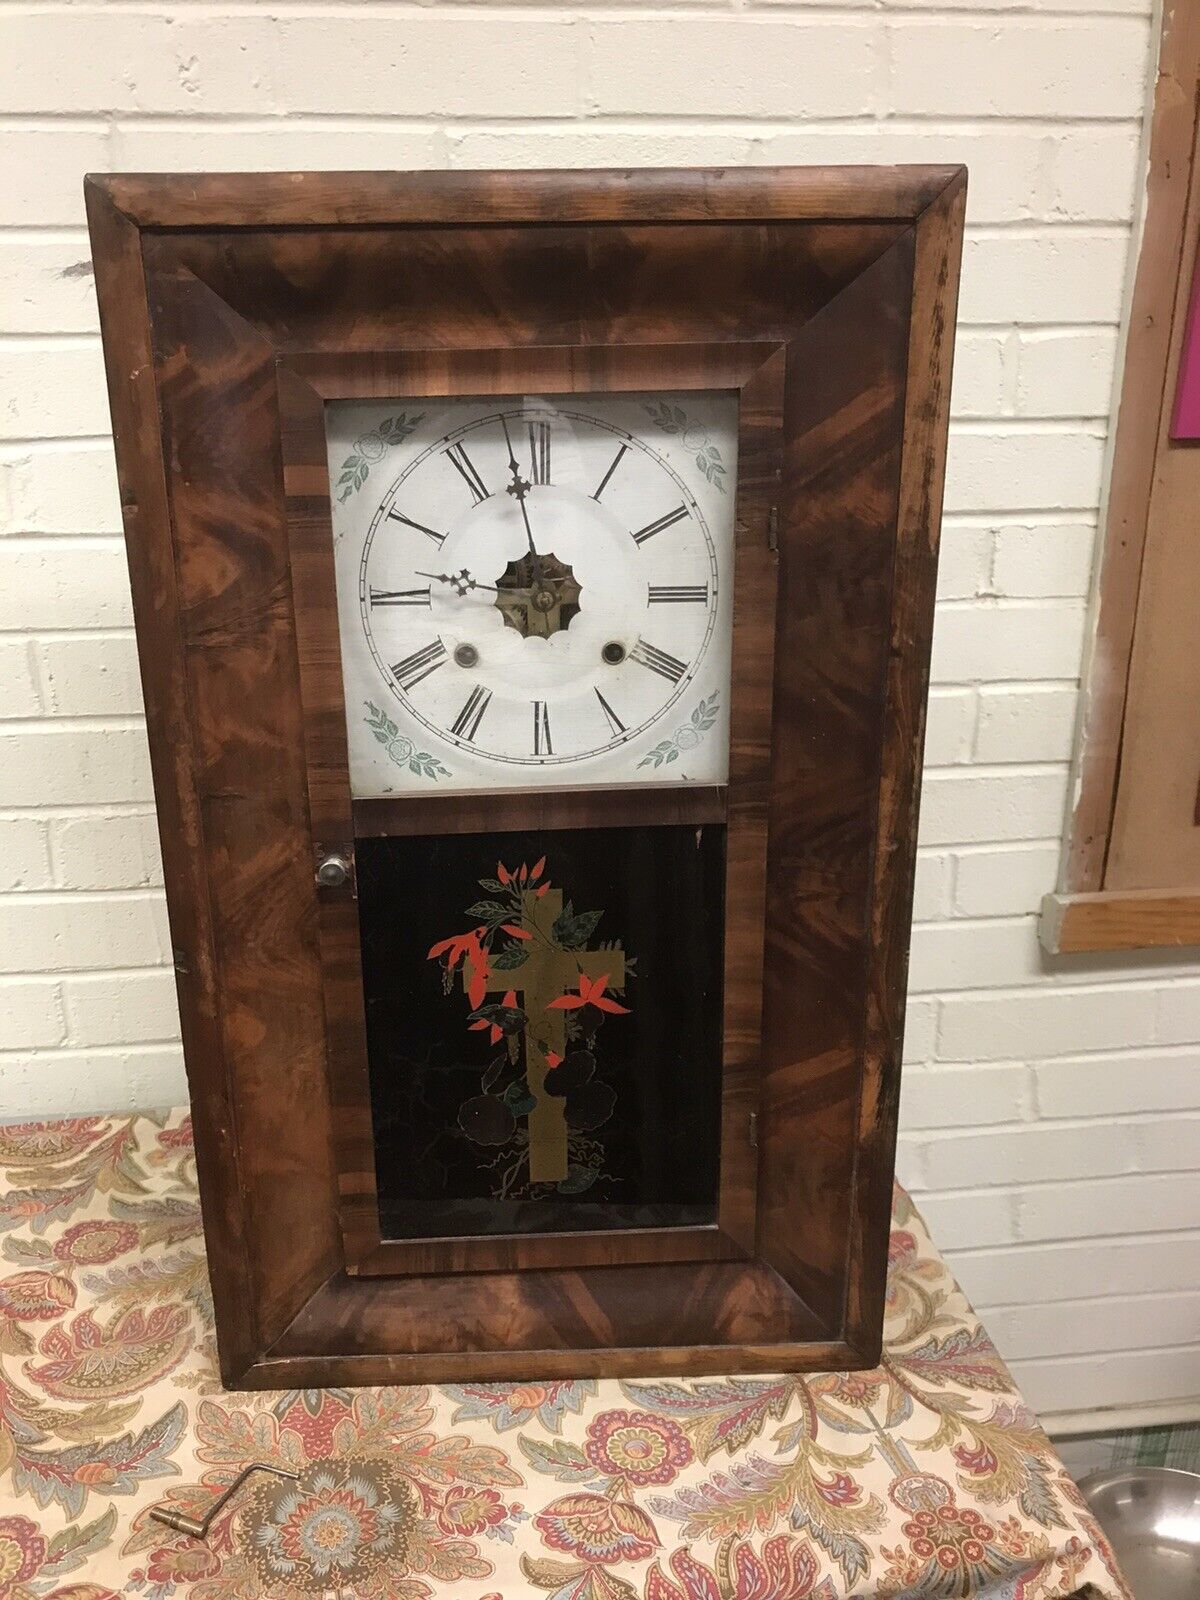 ANTIQUE VTG 1880’s  RELIGIOUS ANSONIA CLOCK W/CROSS, SIDE WEIGHTS WORKS CHIMES